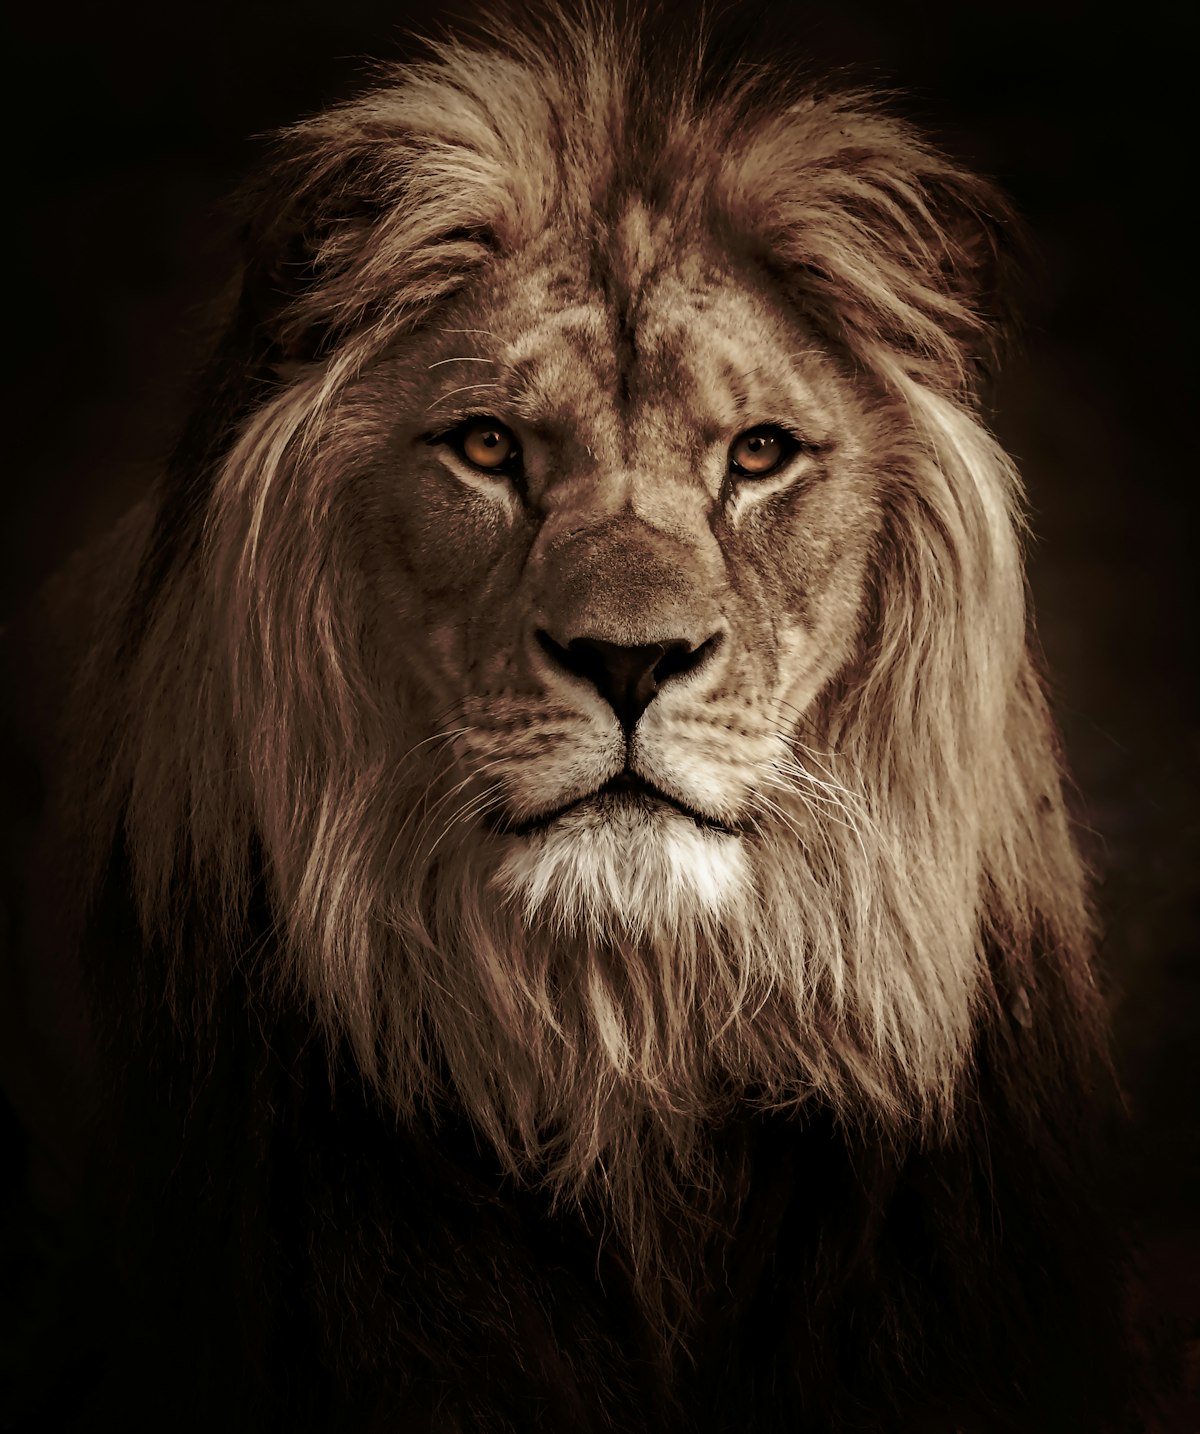 The Majesty and Plight of Lions: Join the Conservation Movement and Make a Difference!